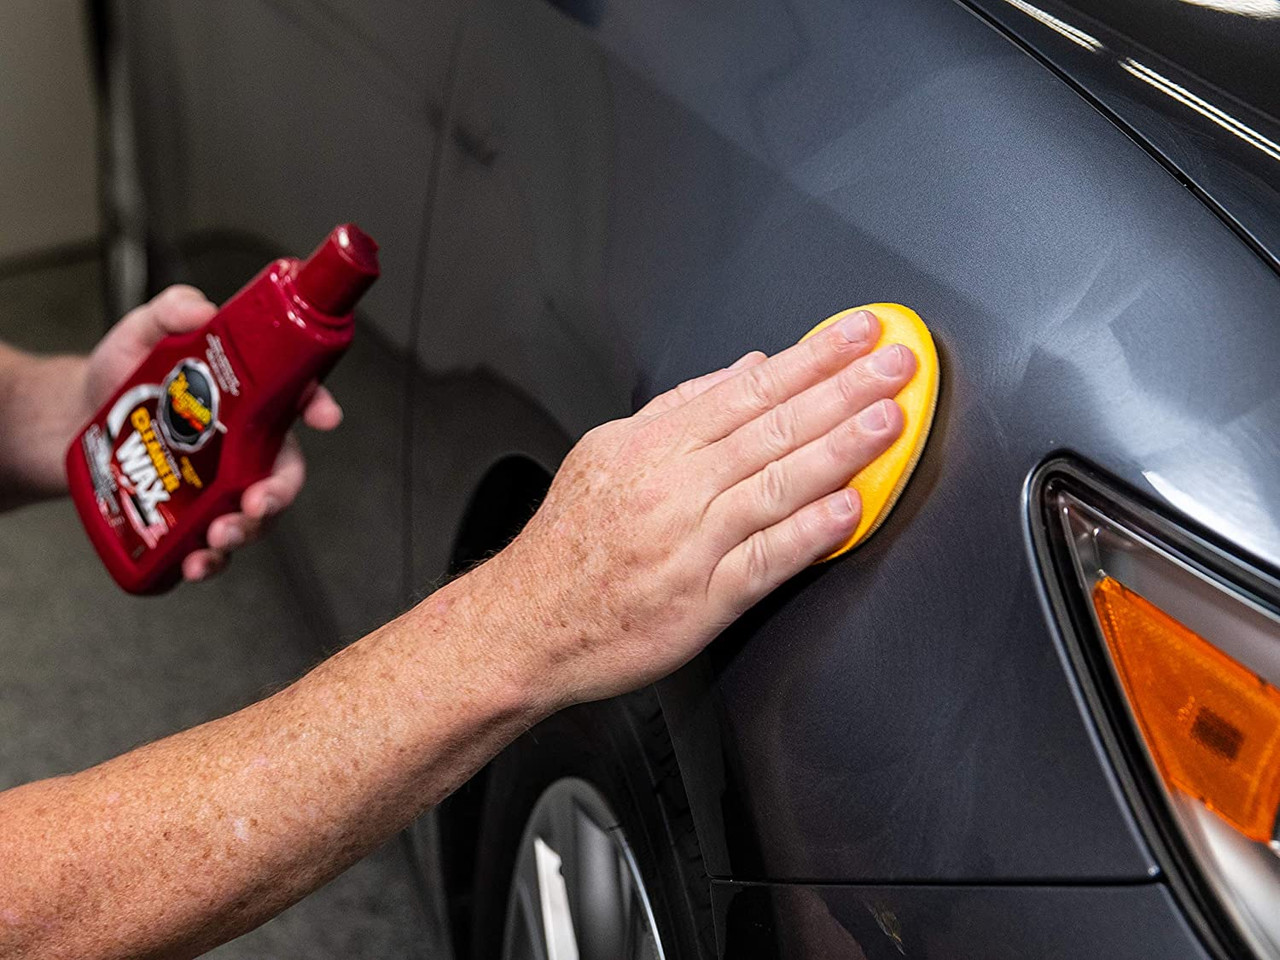 Meguiar's Cleaner Wax - Paste Wax Cleans, Shines and Protects in One Easy  Step - A1214, 11 Oz, Paste